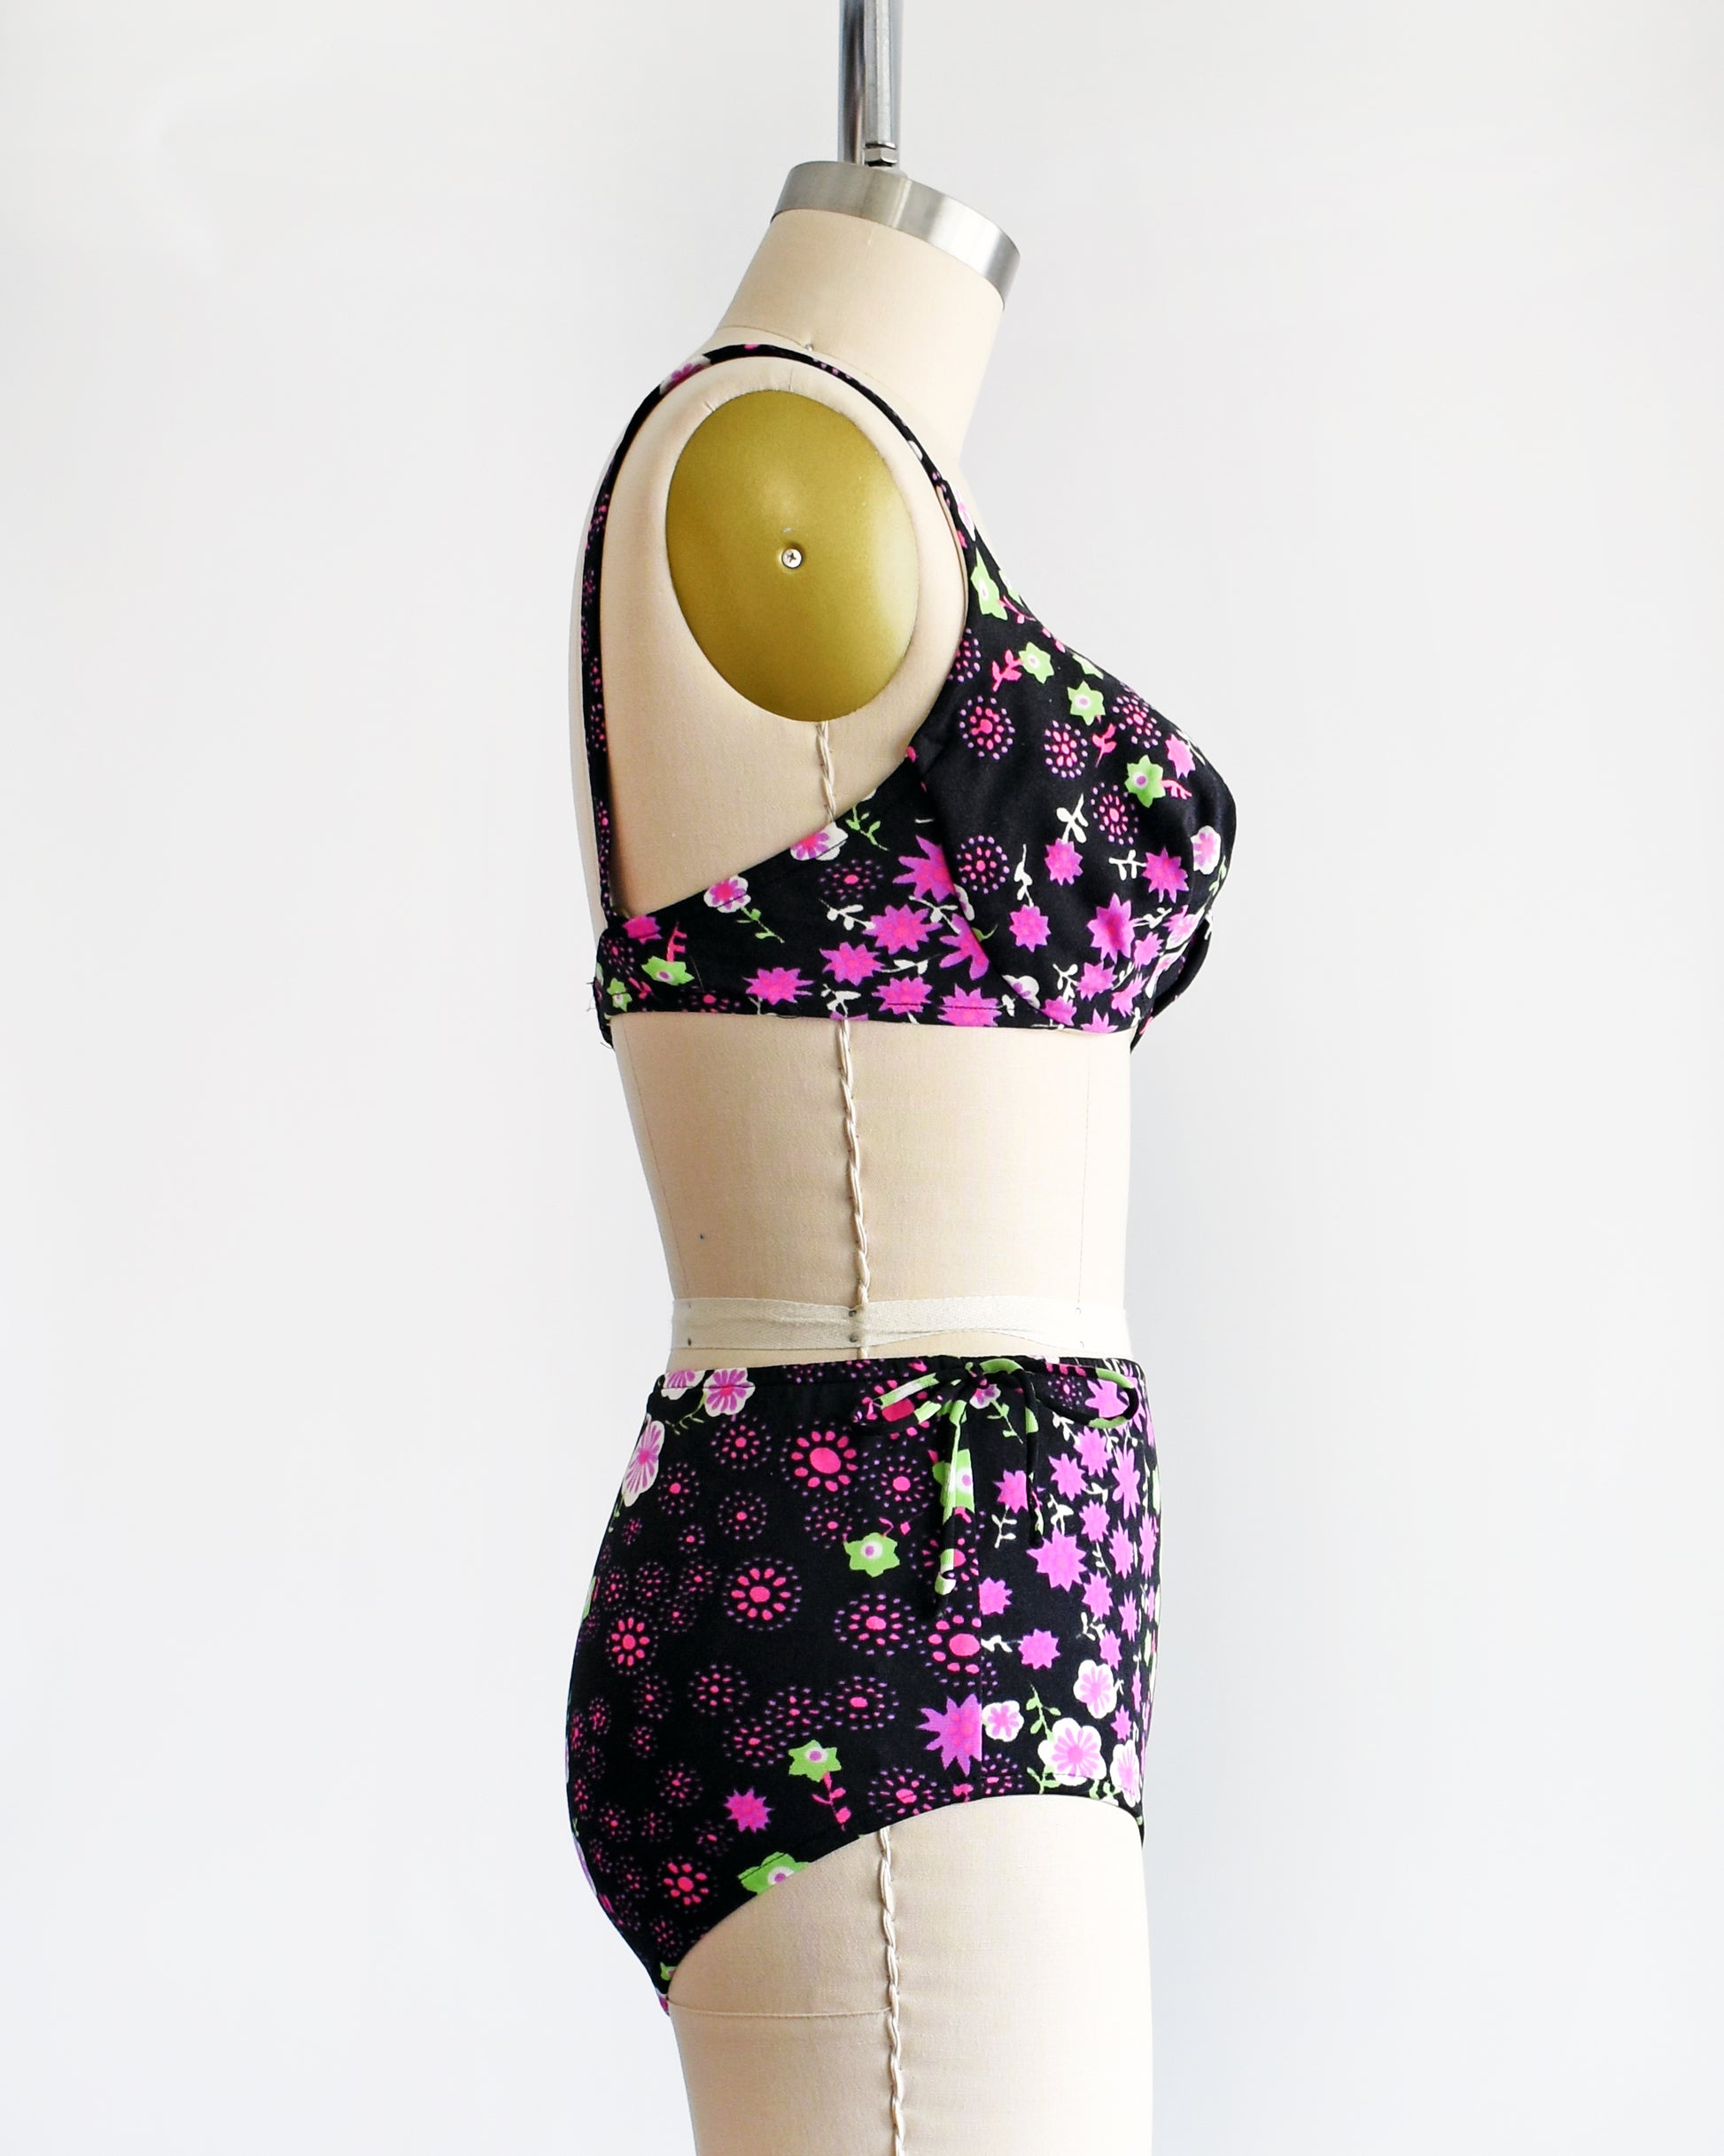 side view of a vintage 1960s two piece bikini set that is black and has a bright pink, purple, green, and white flower power print on a dress form.